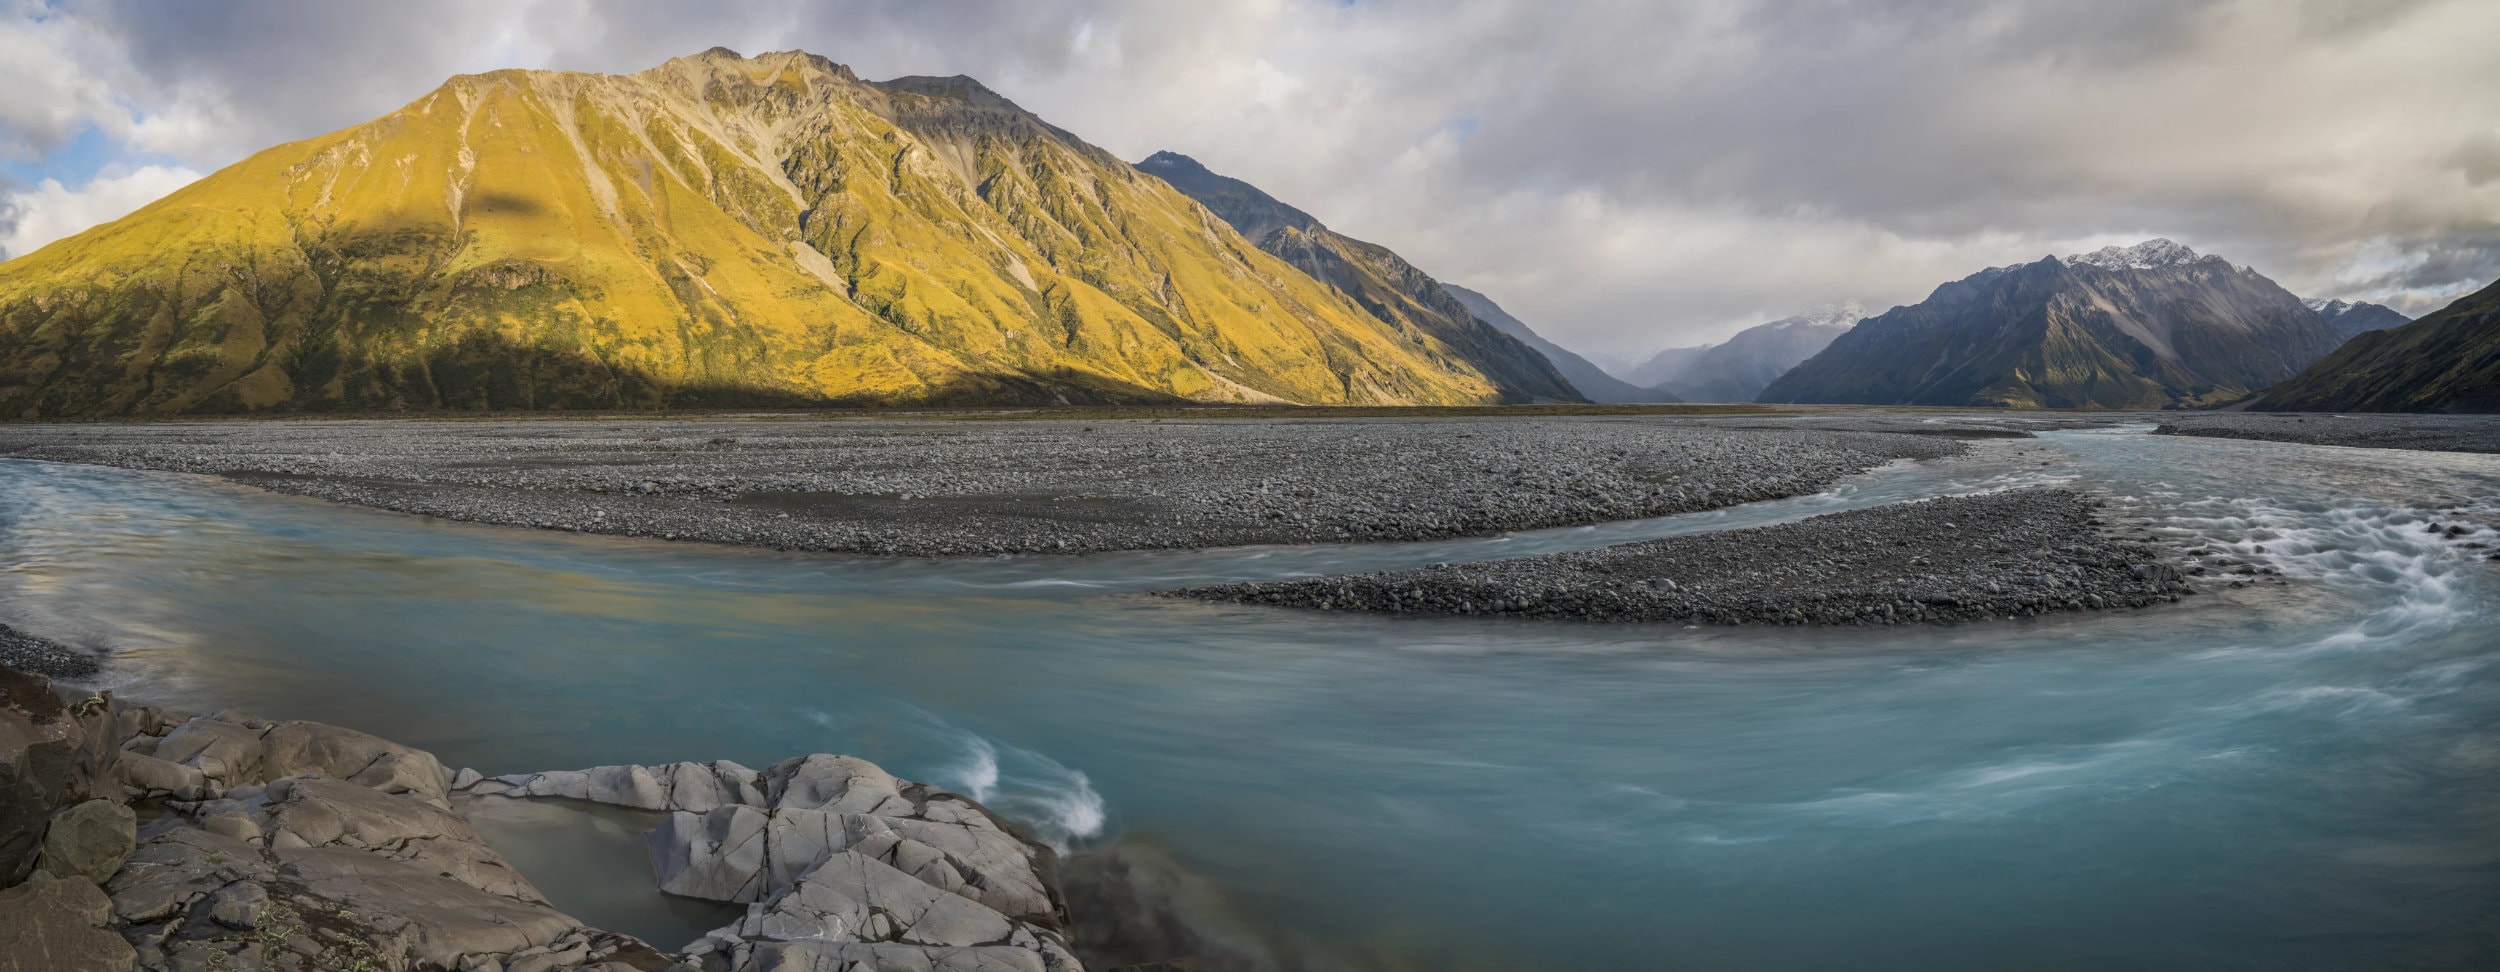 Panoramic view of braided river in New Zealand